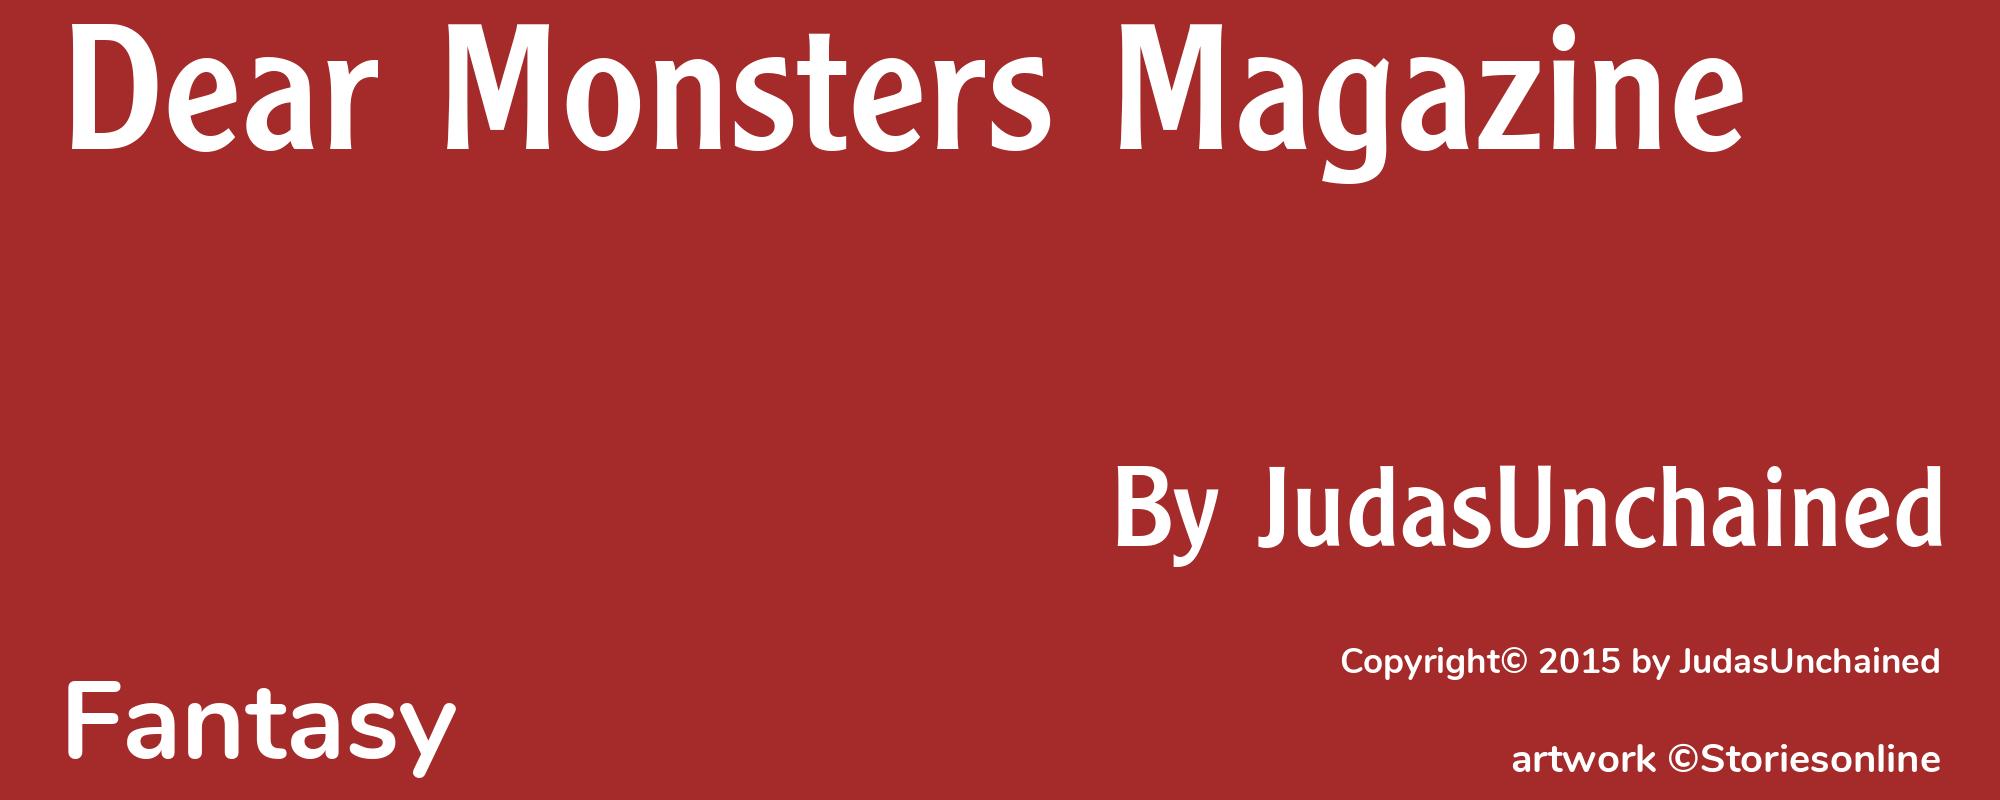 Dear Monsters Magazine - Cover